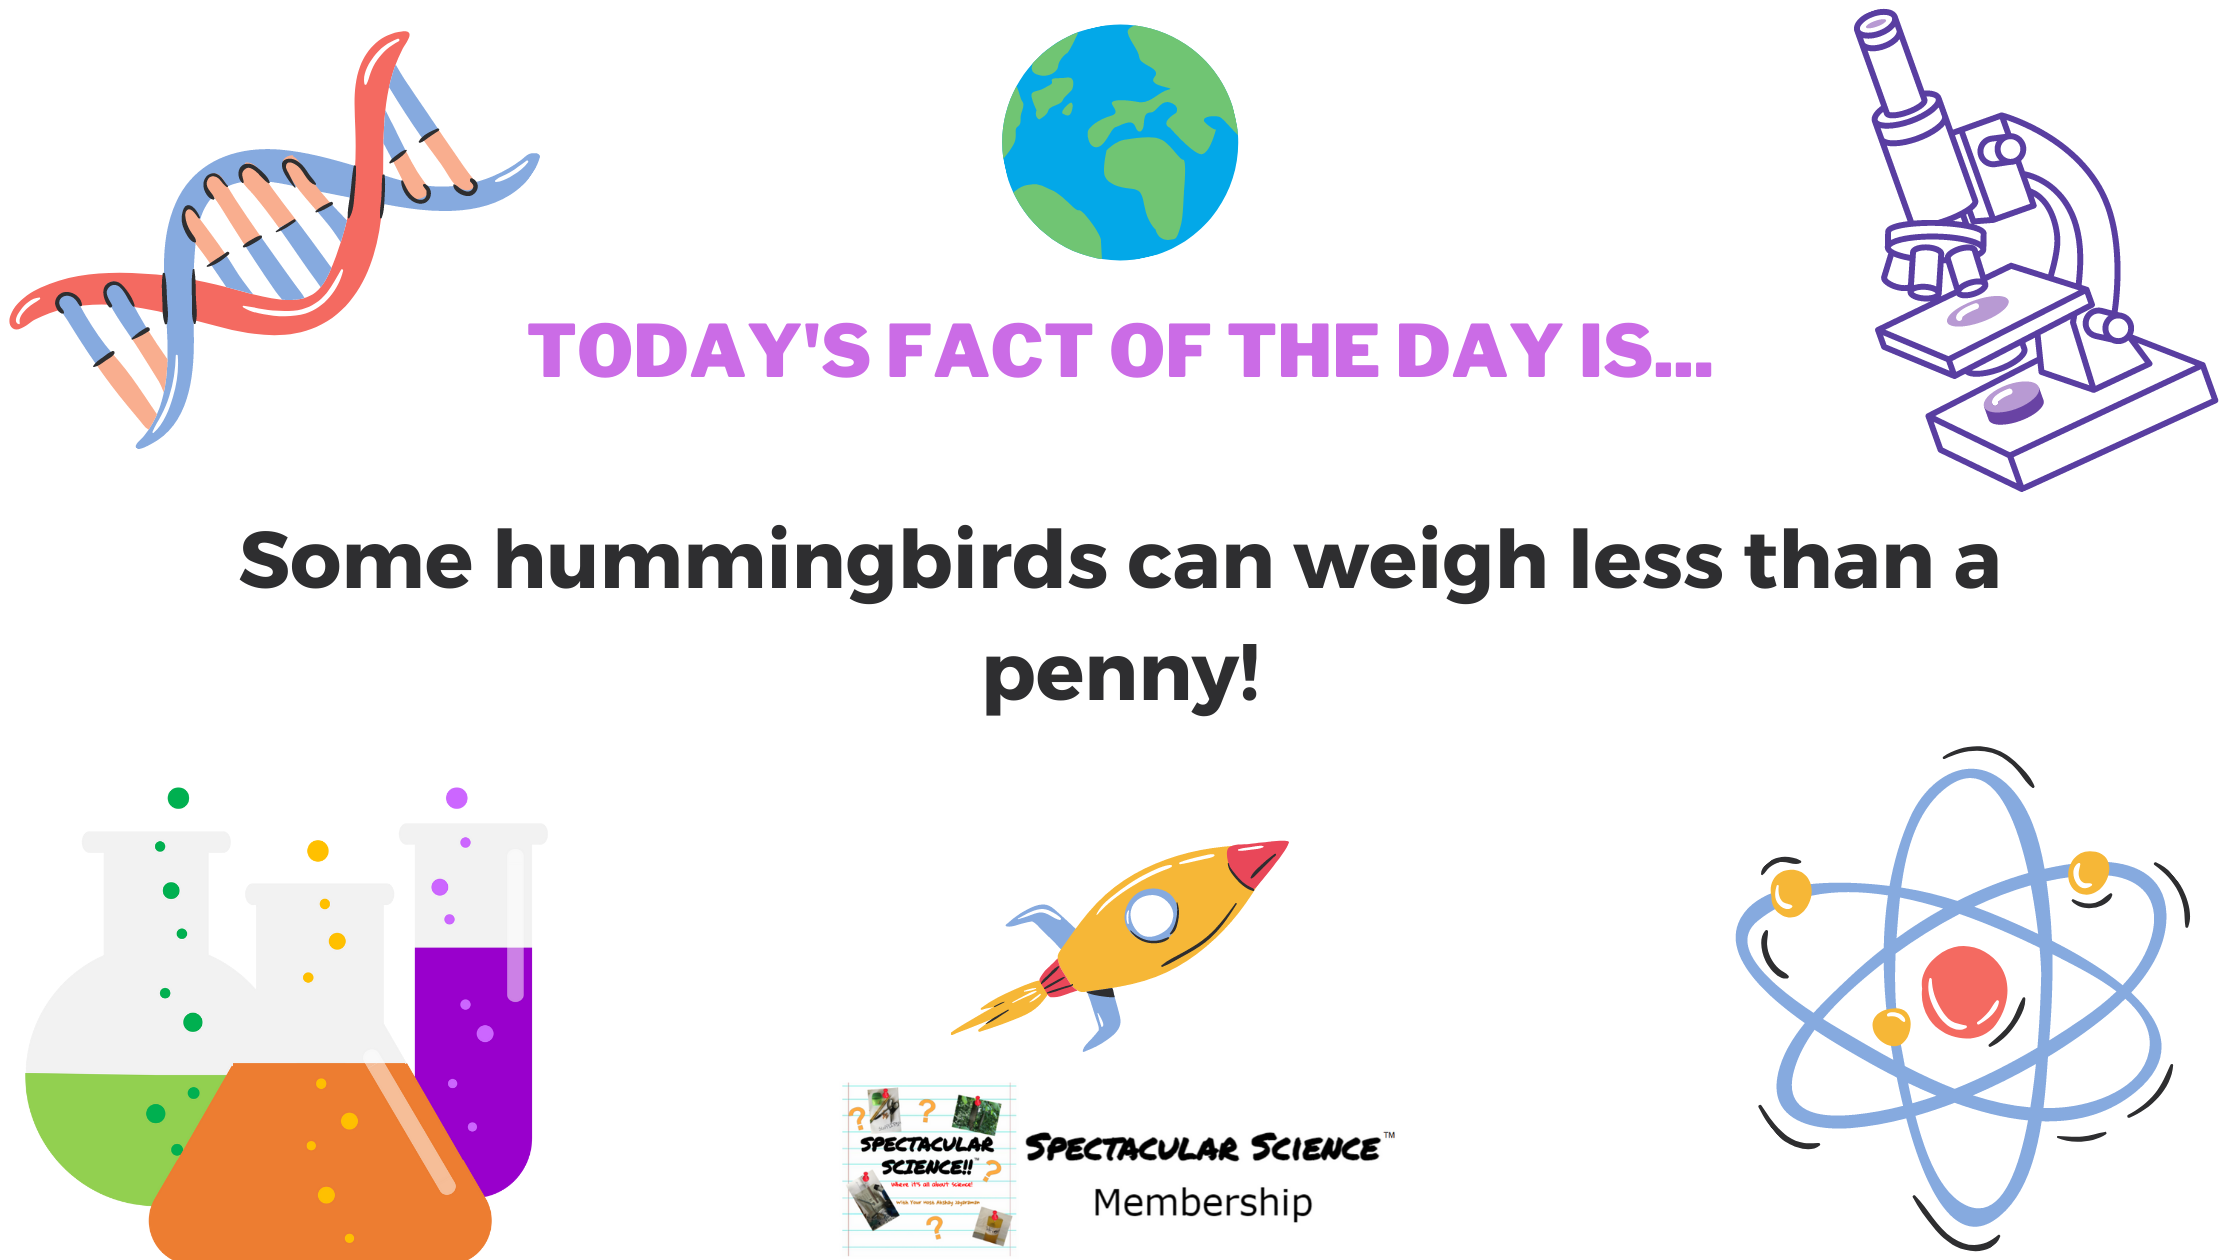 Fact of the Day Image May 26th